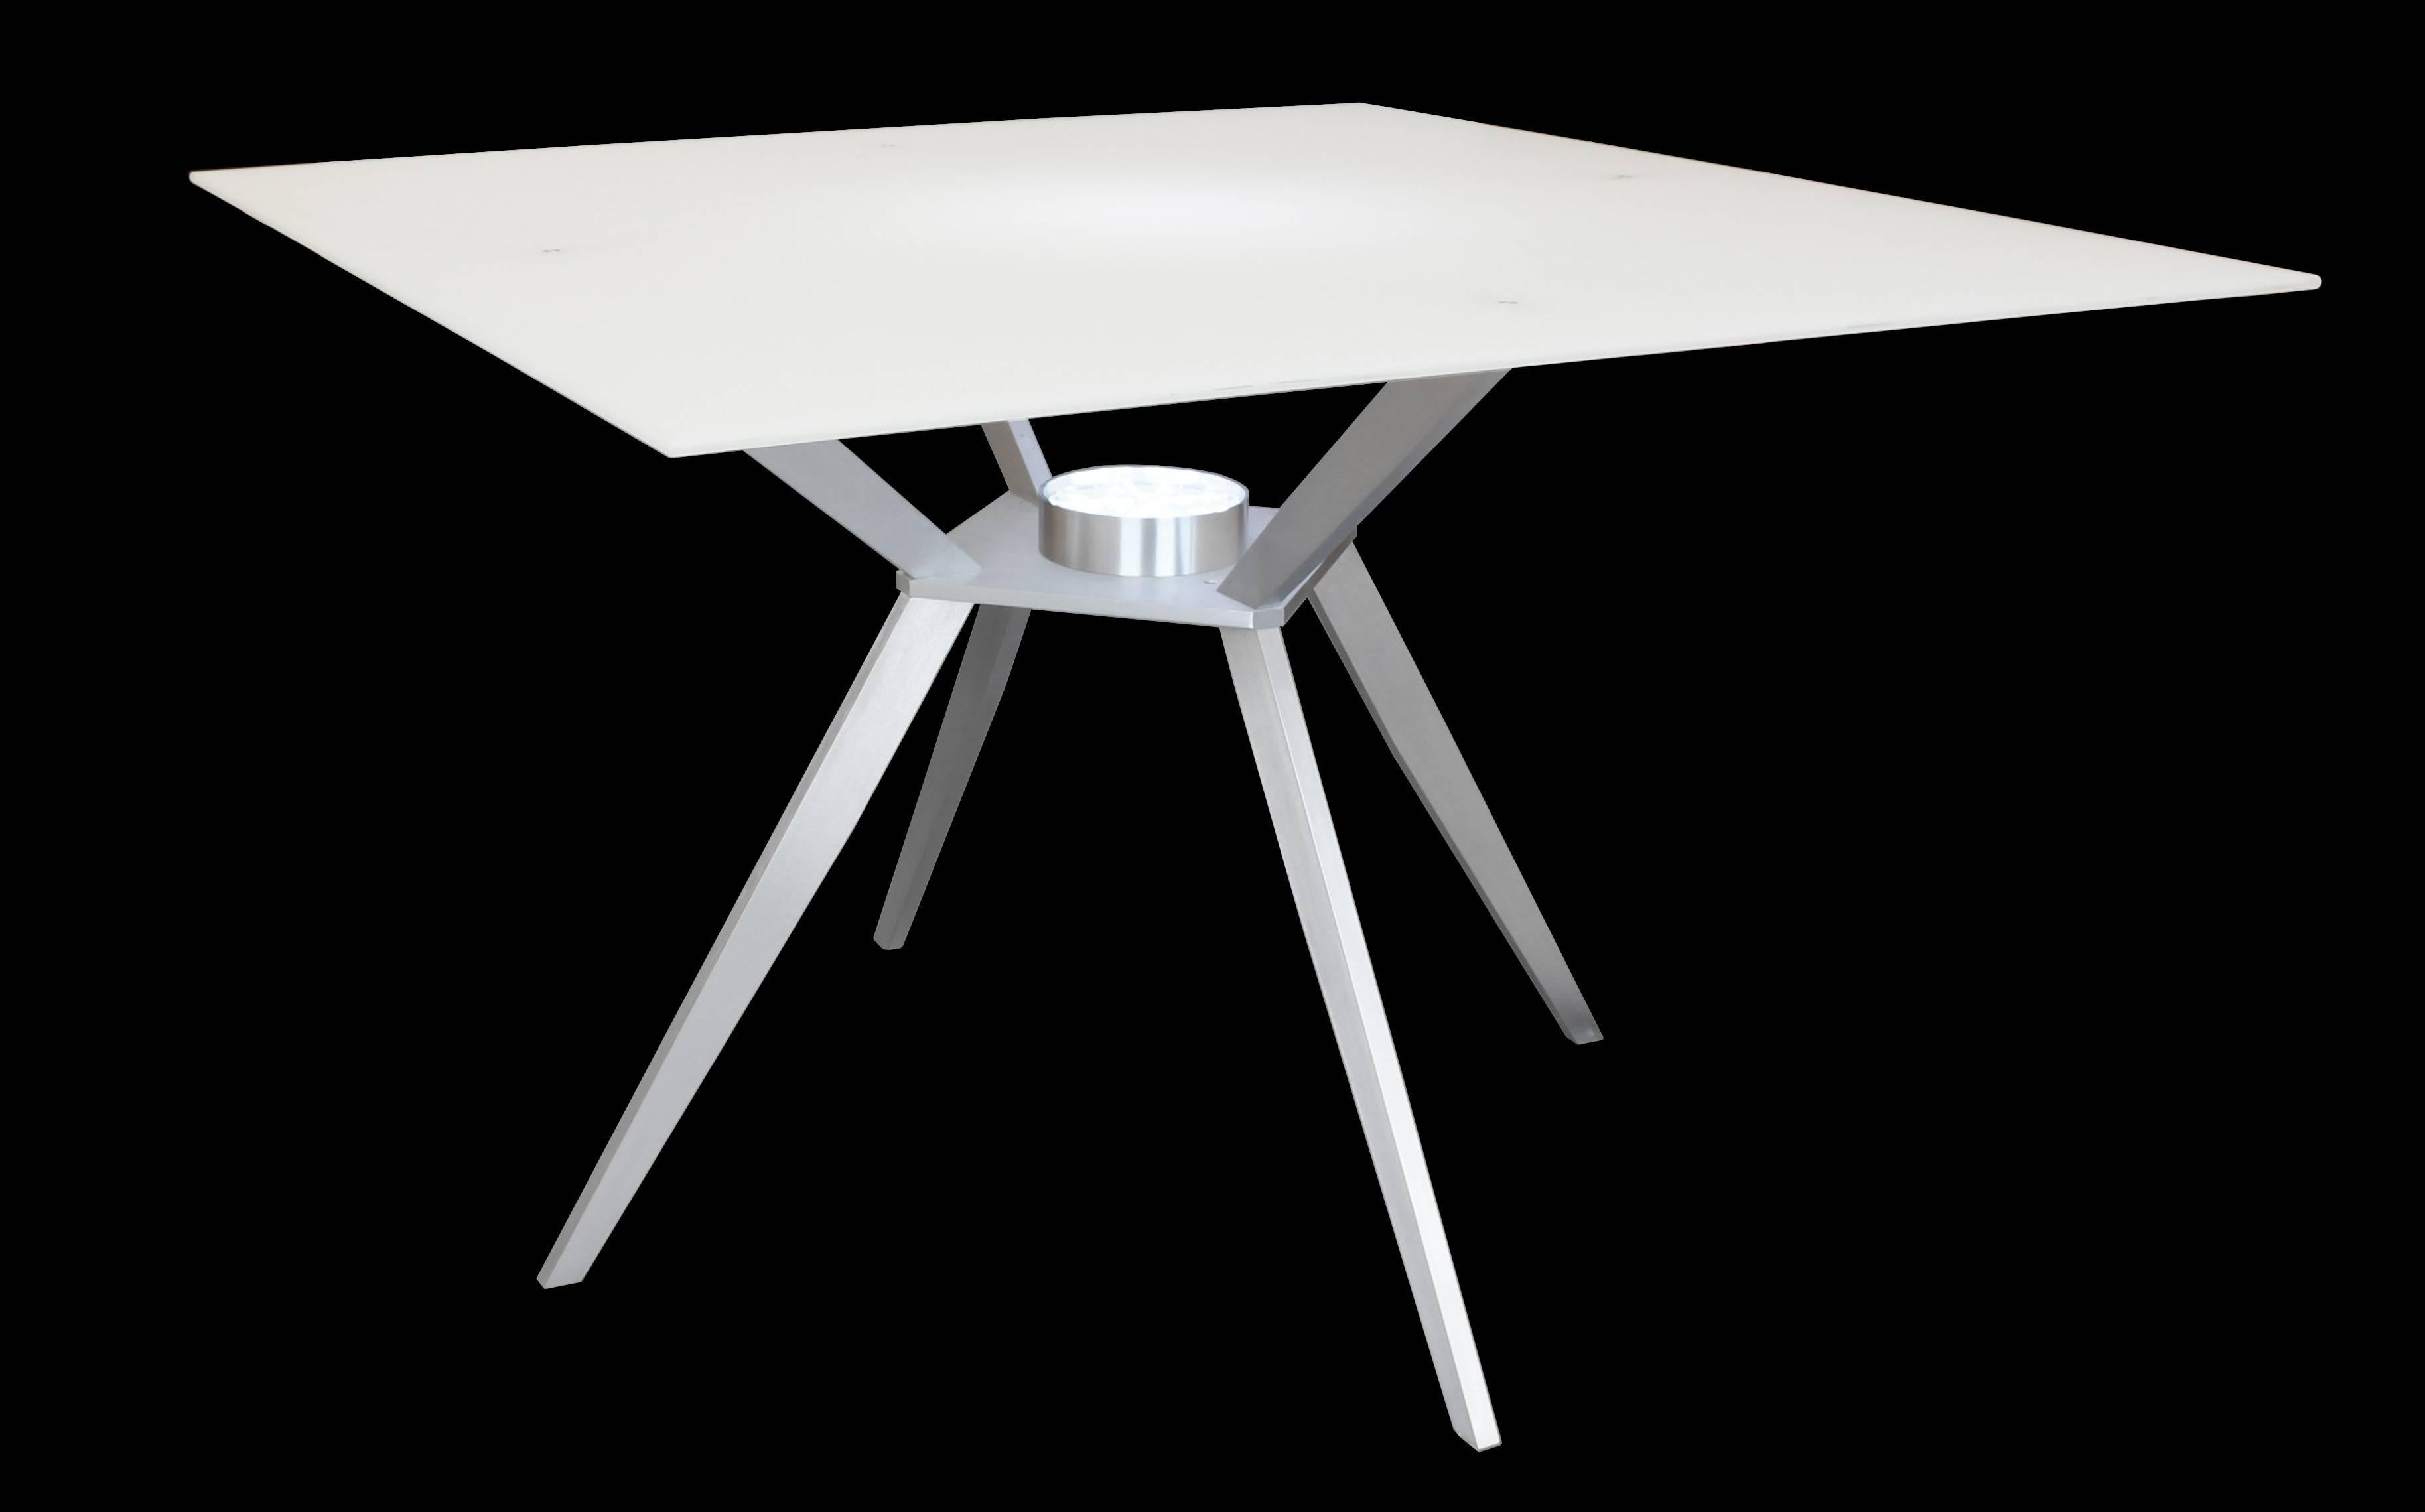 Square glass table, Mid-Century Modern inspired. Legs and upper supports are machined 3/4 inch thick aluminum with a brushed finish. Glass top is 3/8 ths inch thick tempered low iron (no green tint) with pencil edge and ceramic white coat on bottom.